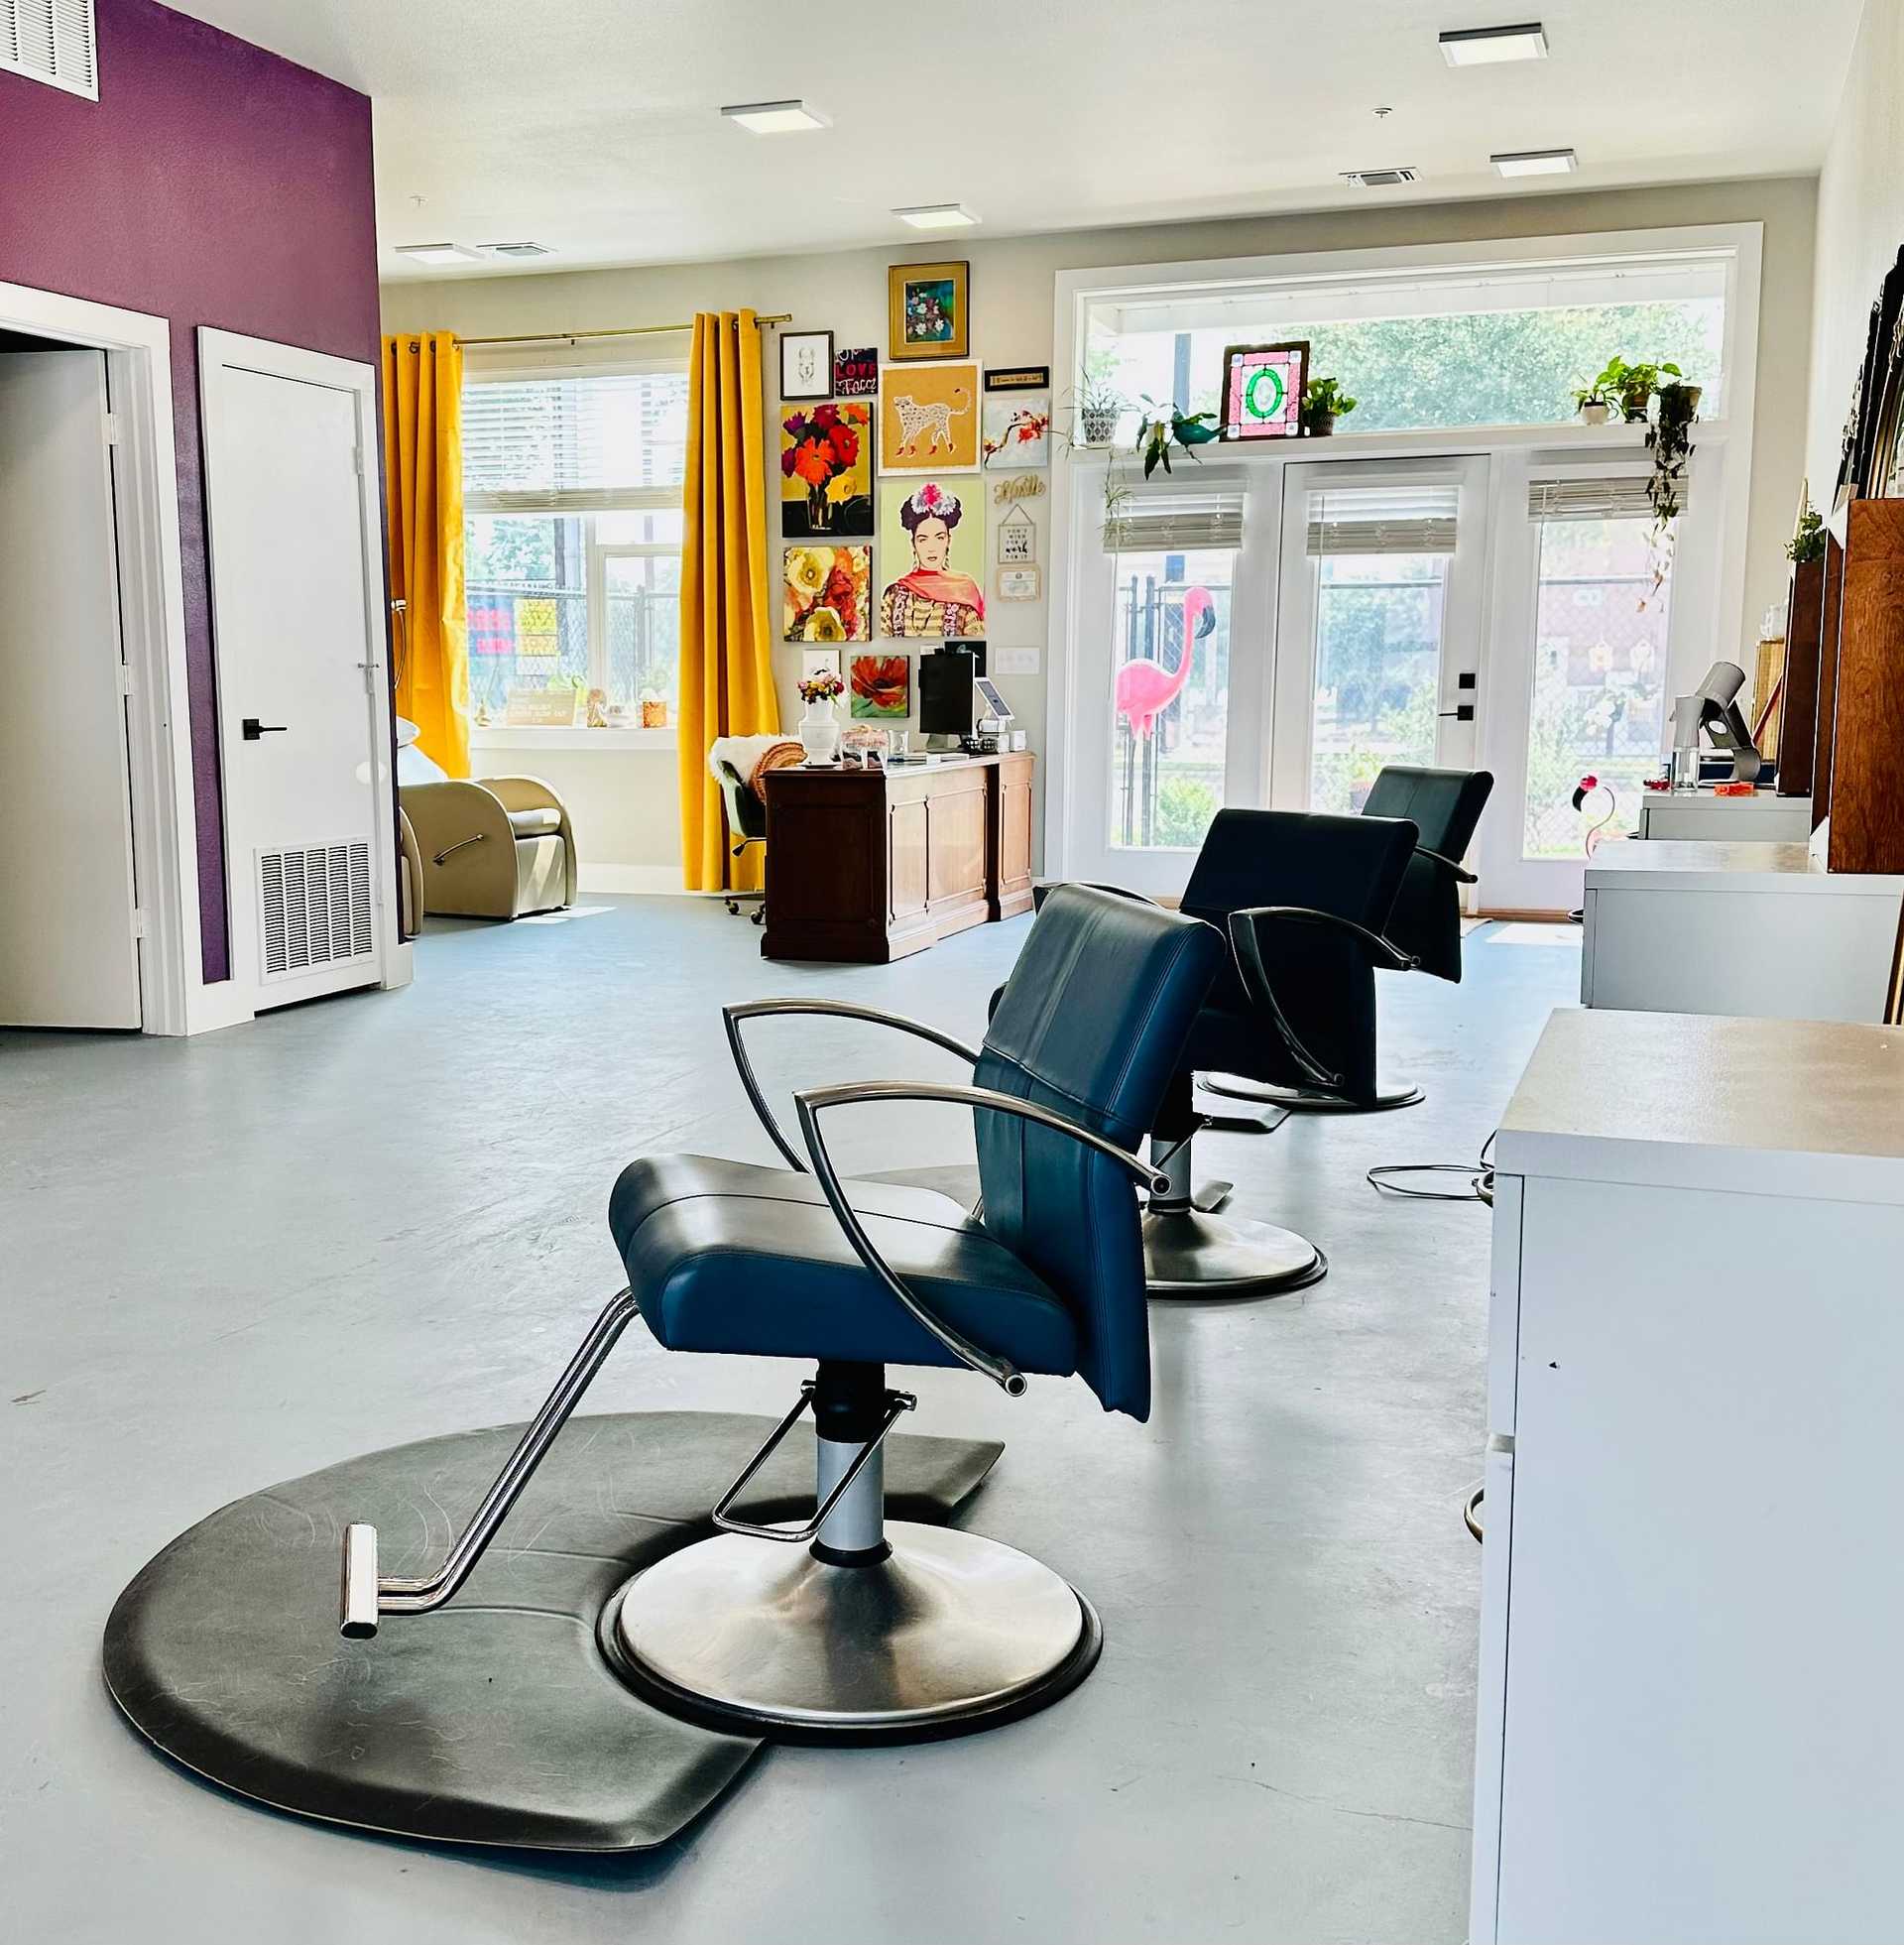 Bright hair salon with styling chairs, colorful wall art, and large windows with yellow curtains.